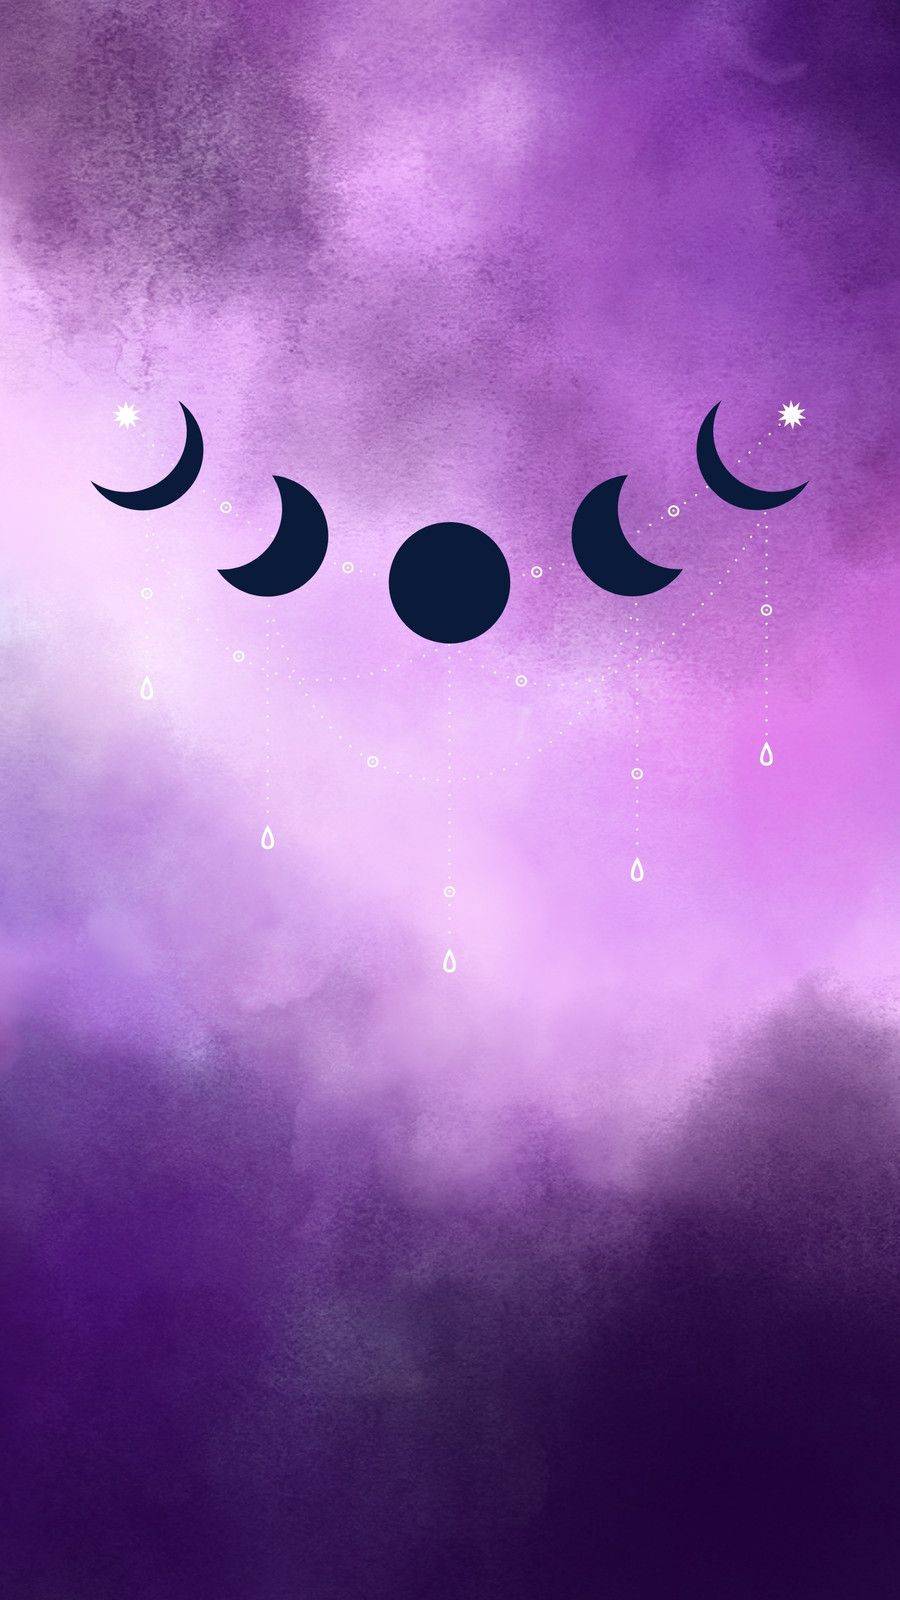 A purple and blue background with the moon phases - Moon phases